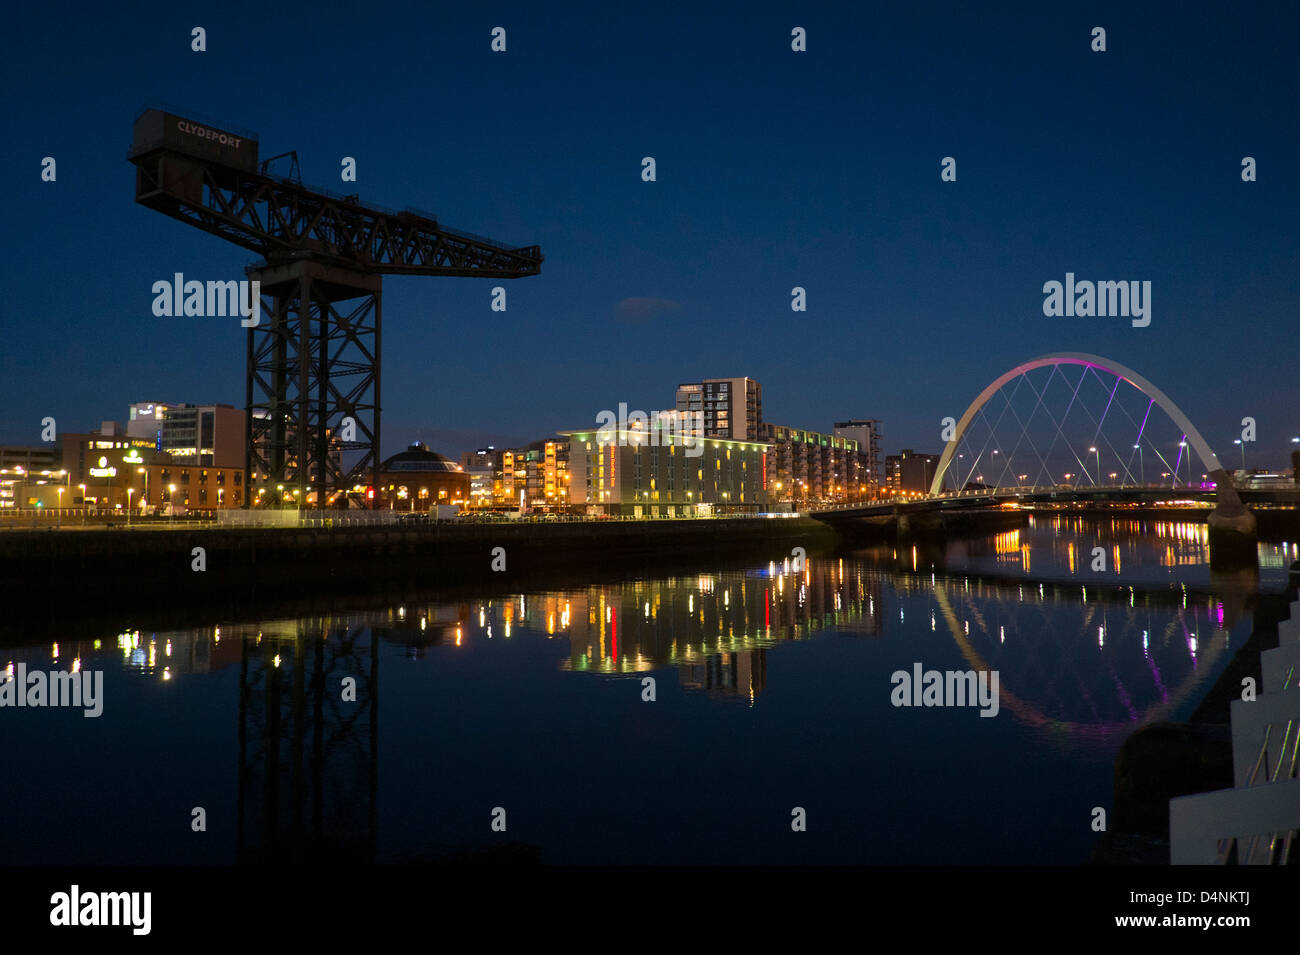 A night time view of the river Clyde, showing the Finnieston Crane the Clyde arc and the Hilton Garden Inn, Glasgow Stock Photo